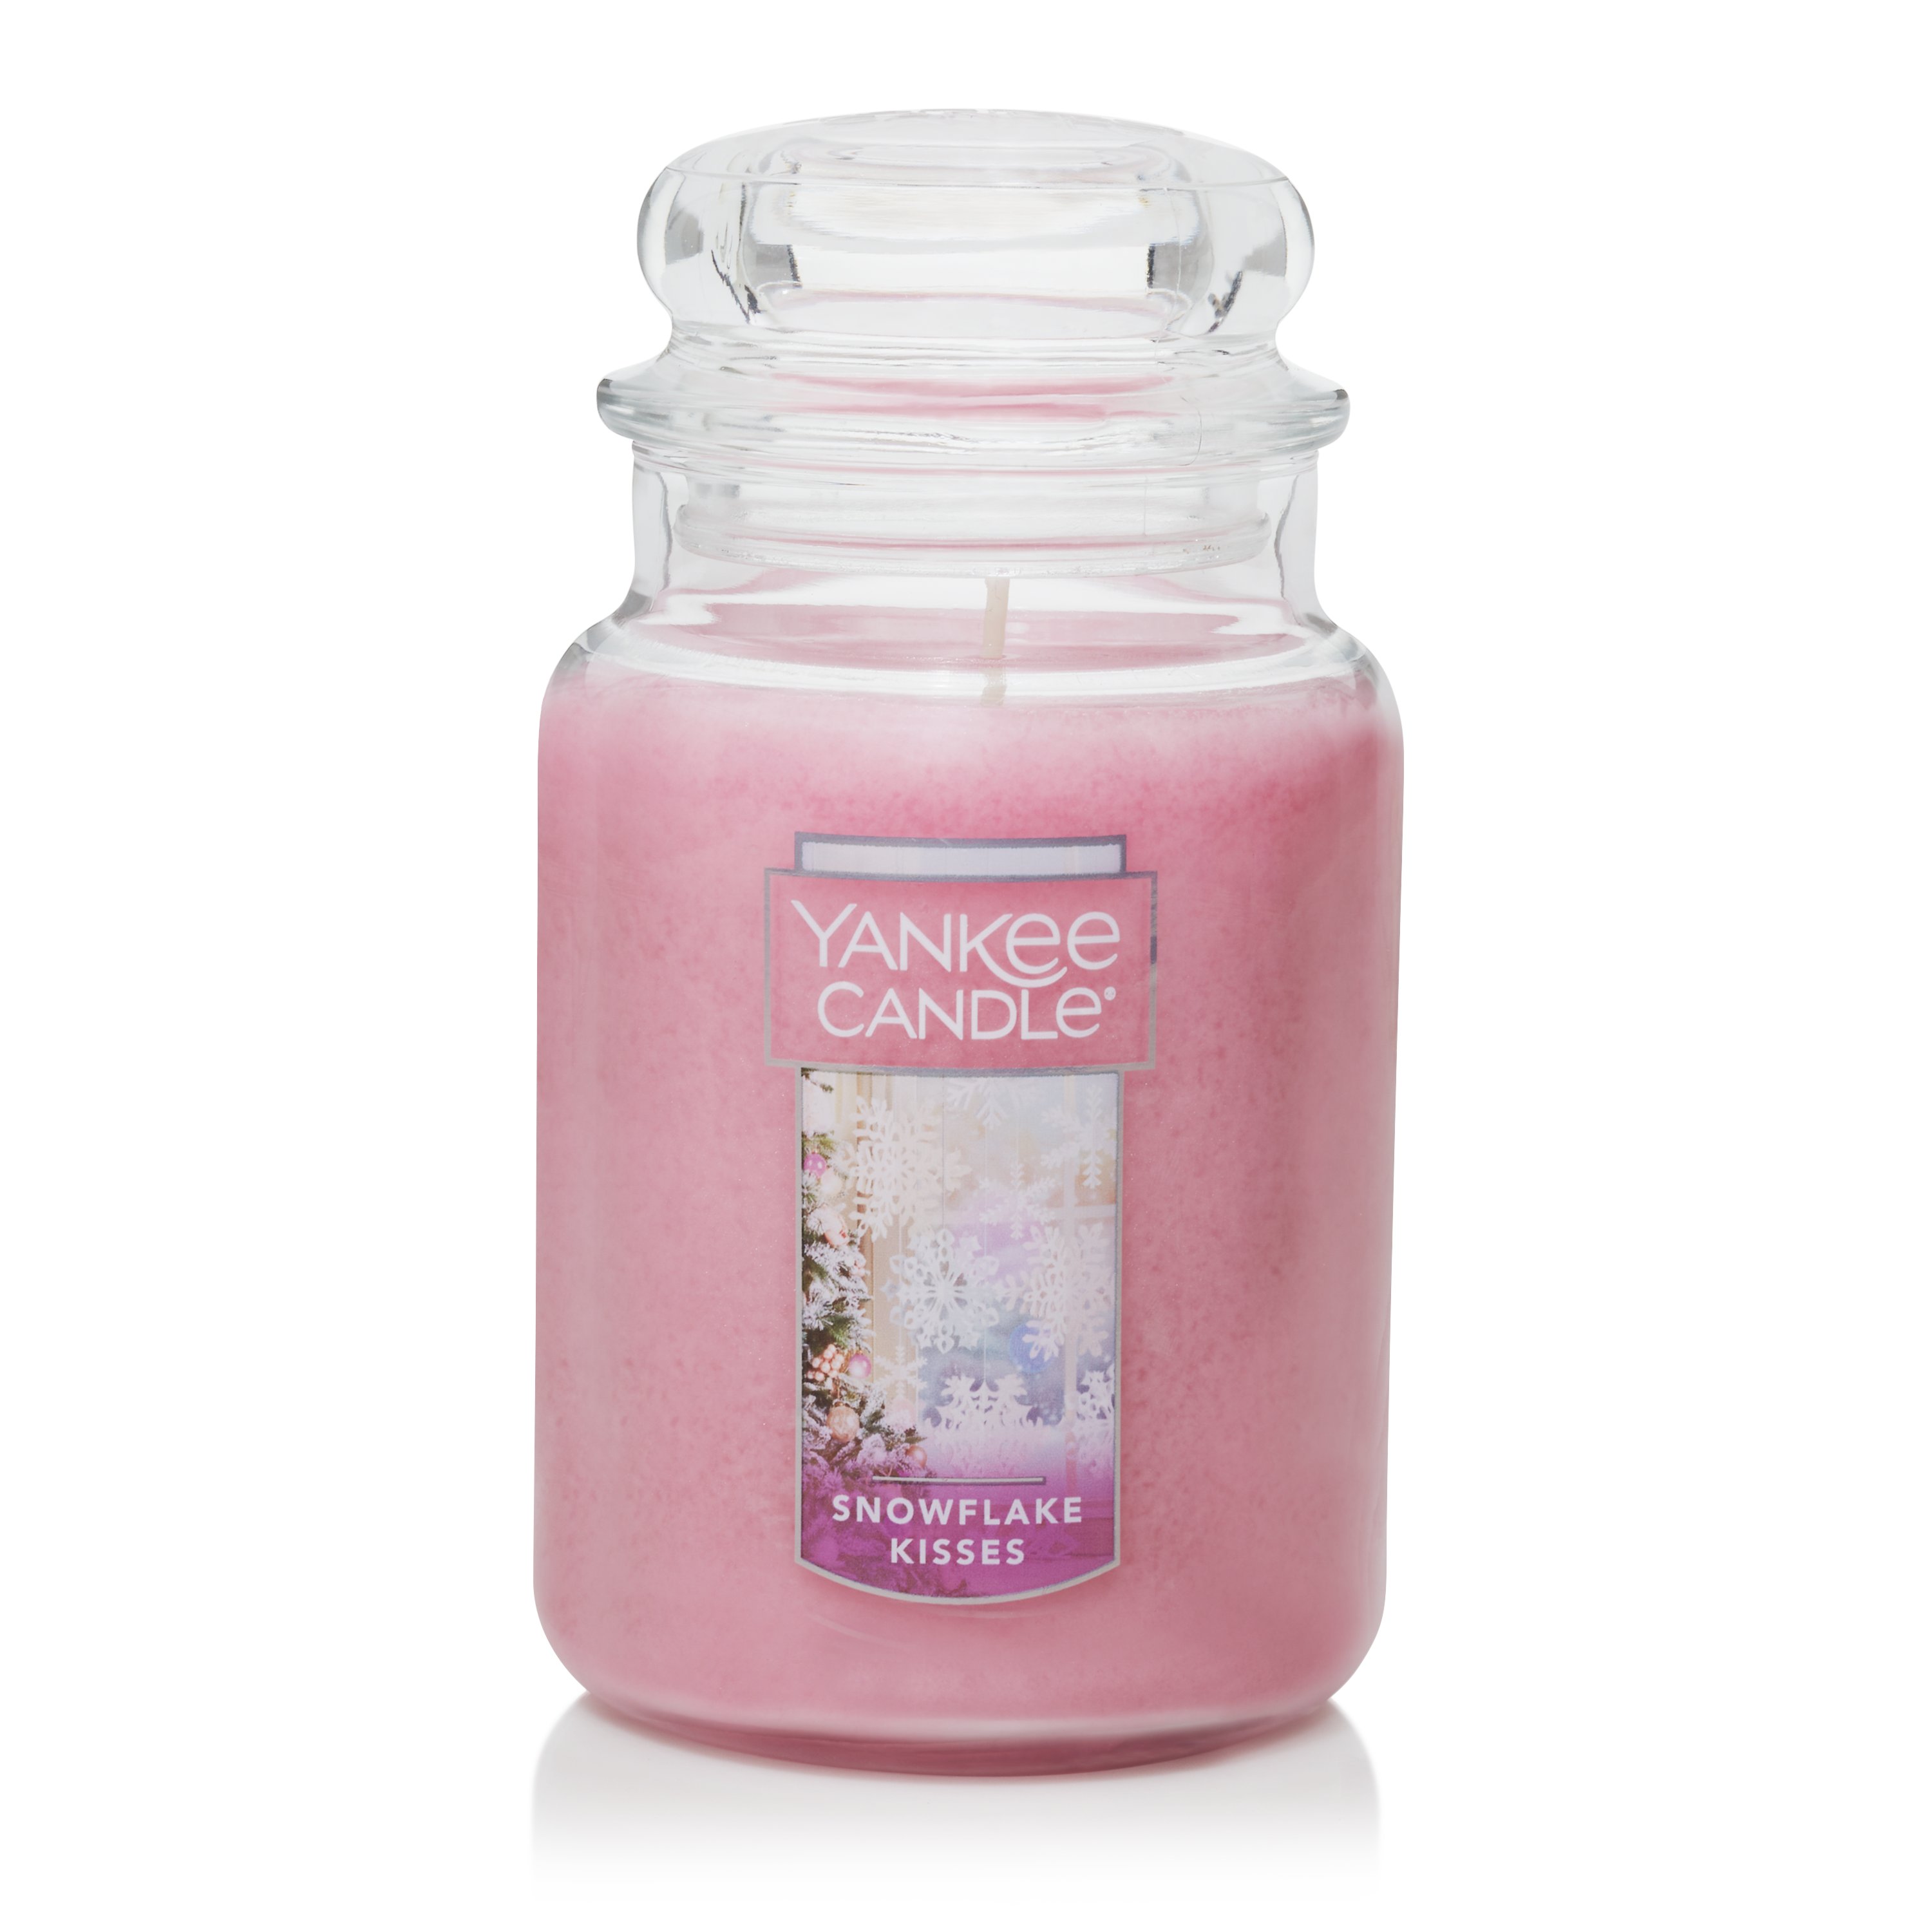 Yankee Candle Review: Is it really as good as its reputation